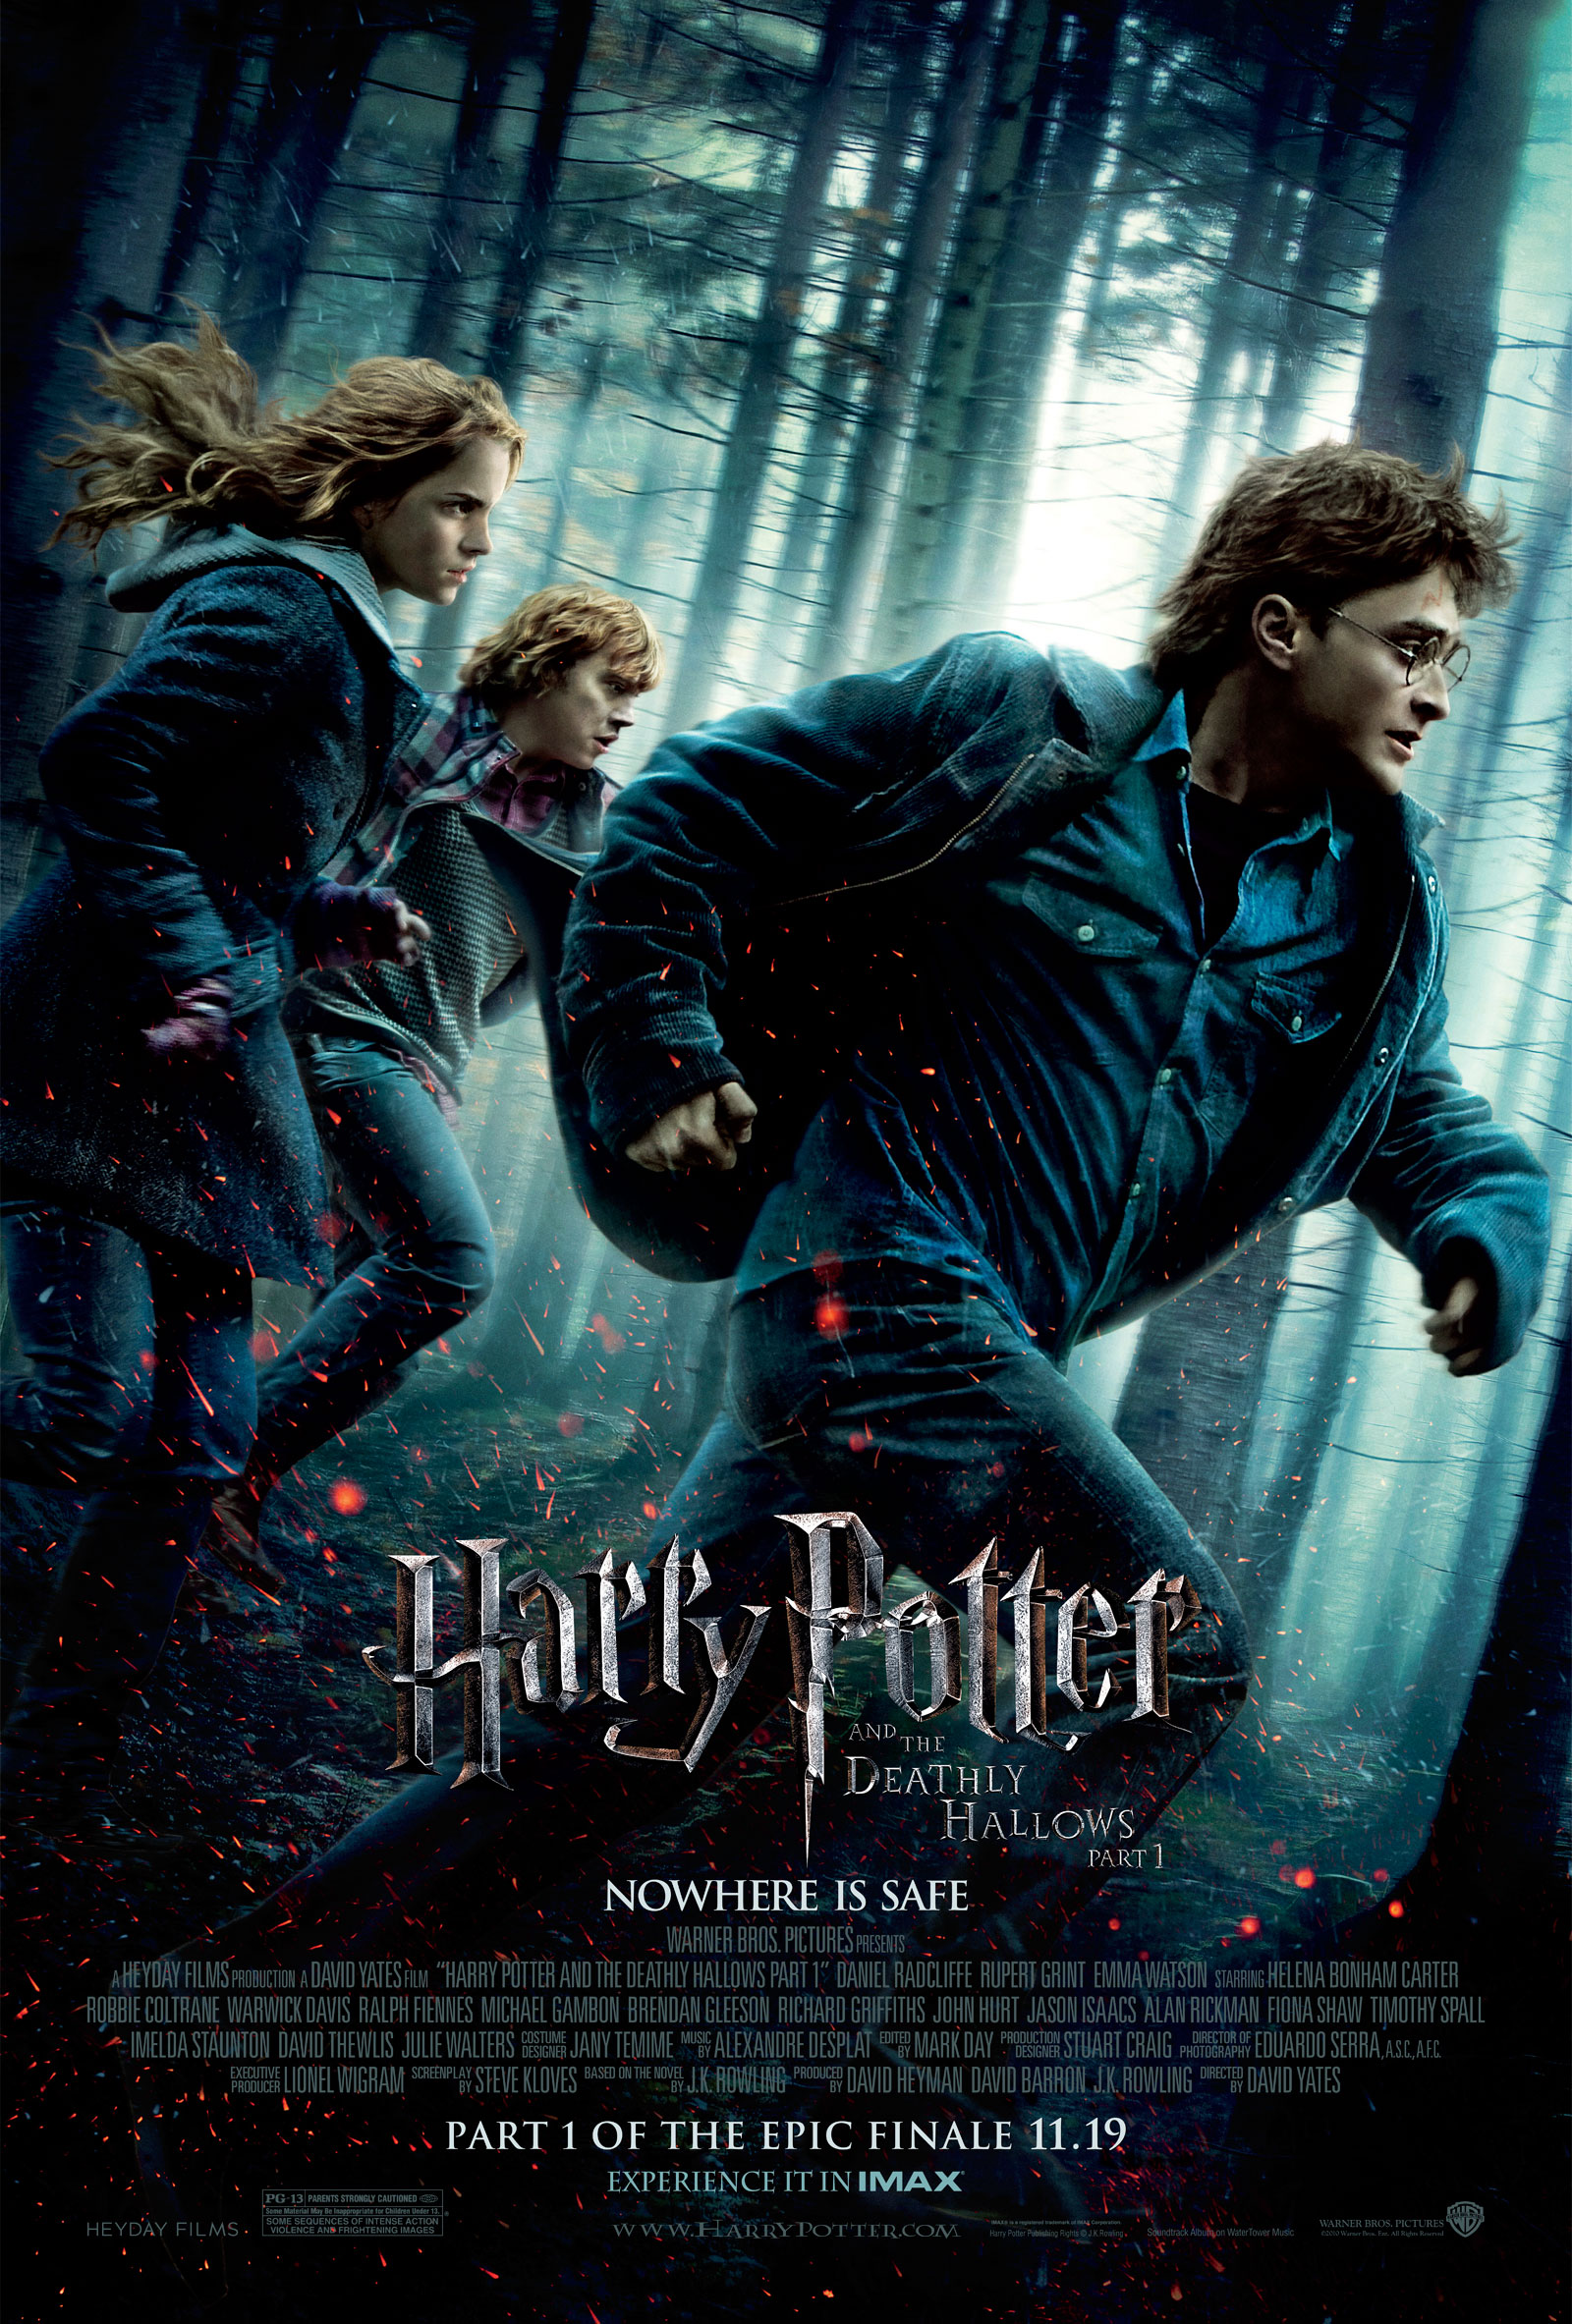 Download Harry Potter And The Deathly Hallows Wallpaper High resolution